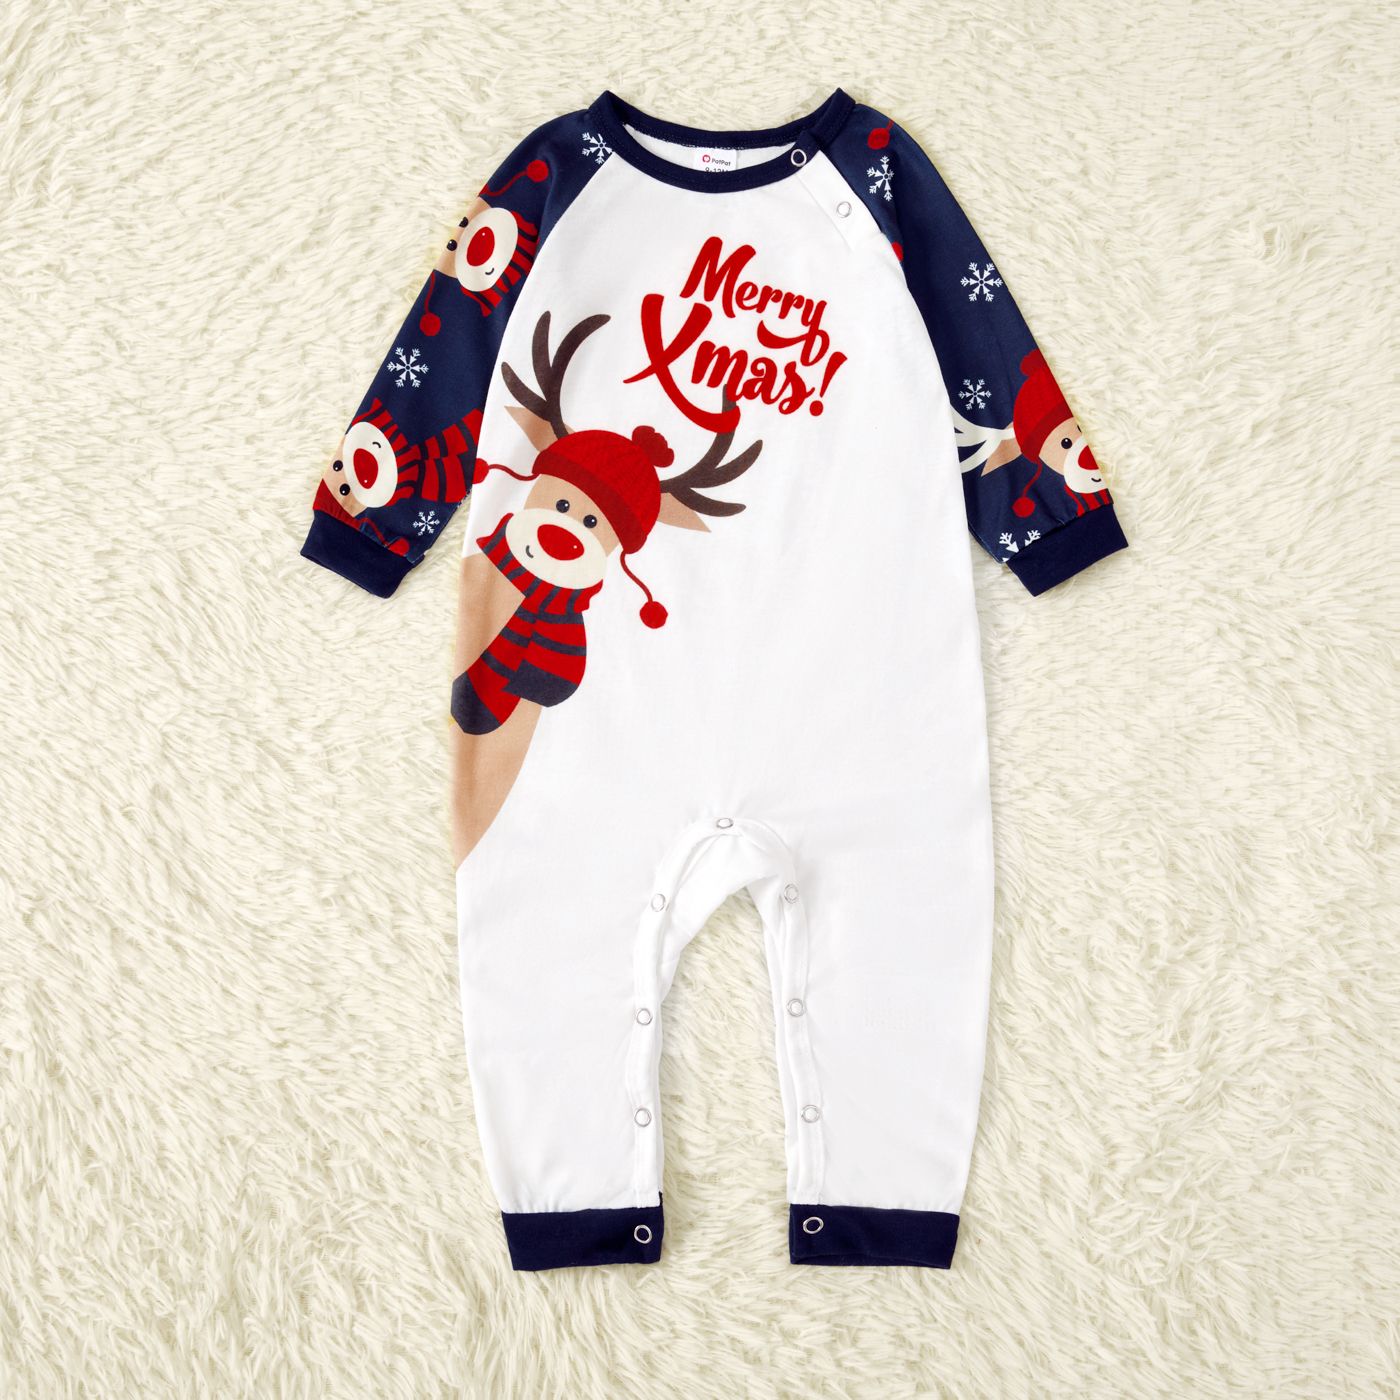 Merry Xmas Letters And Reindeer Print Navy Family Matching Long-sleeve Pajamas Sets (Flame Resistant)